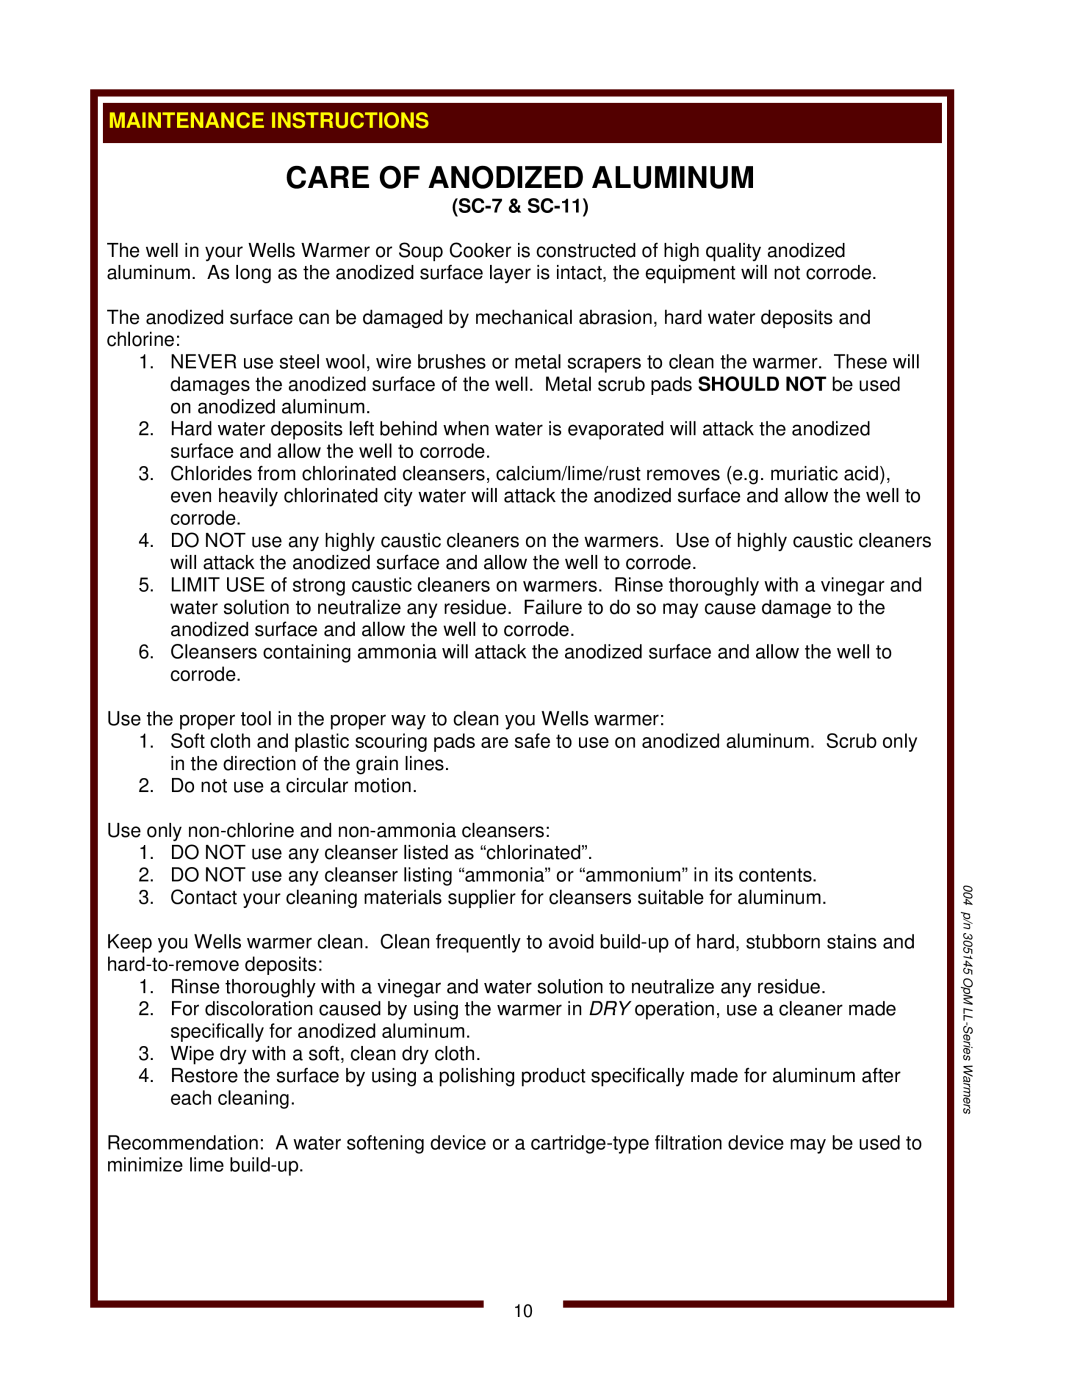 Wells 6411, LLCH-1220 operation manual Care Of Anodized Aluminum, SC-7& SC-11 